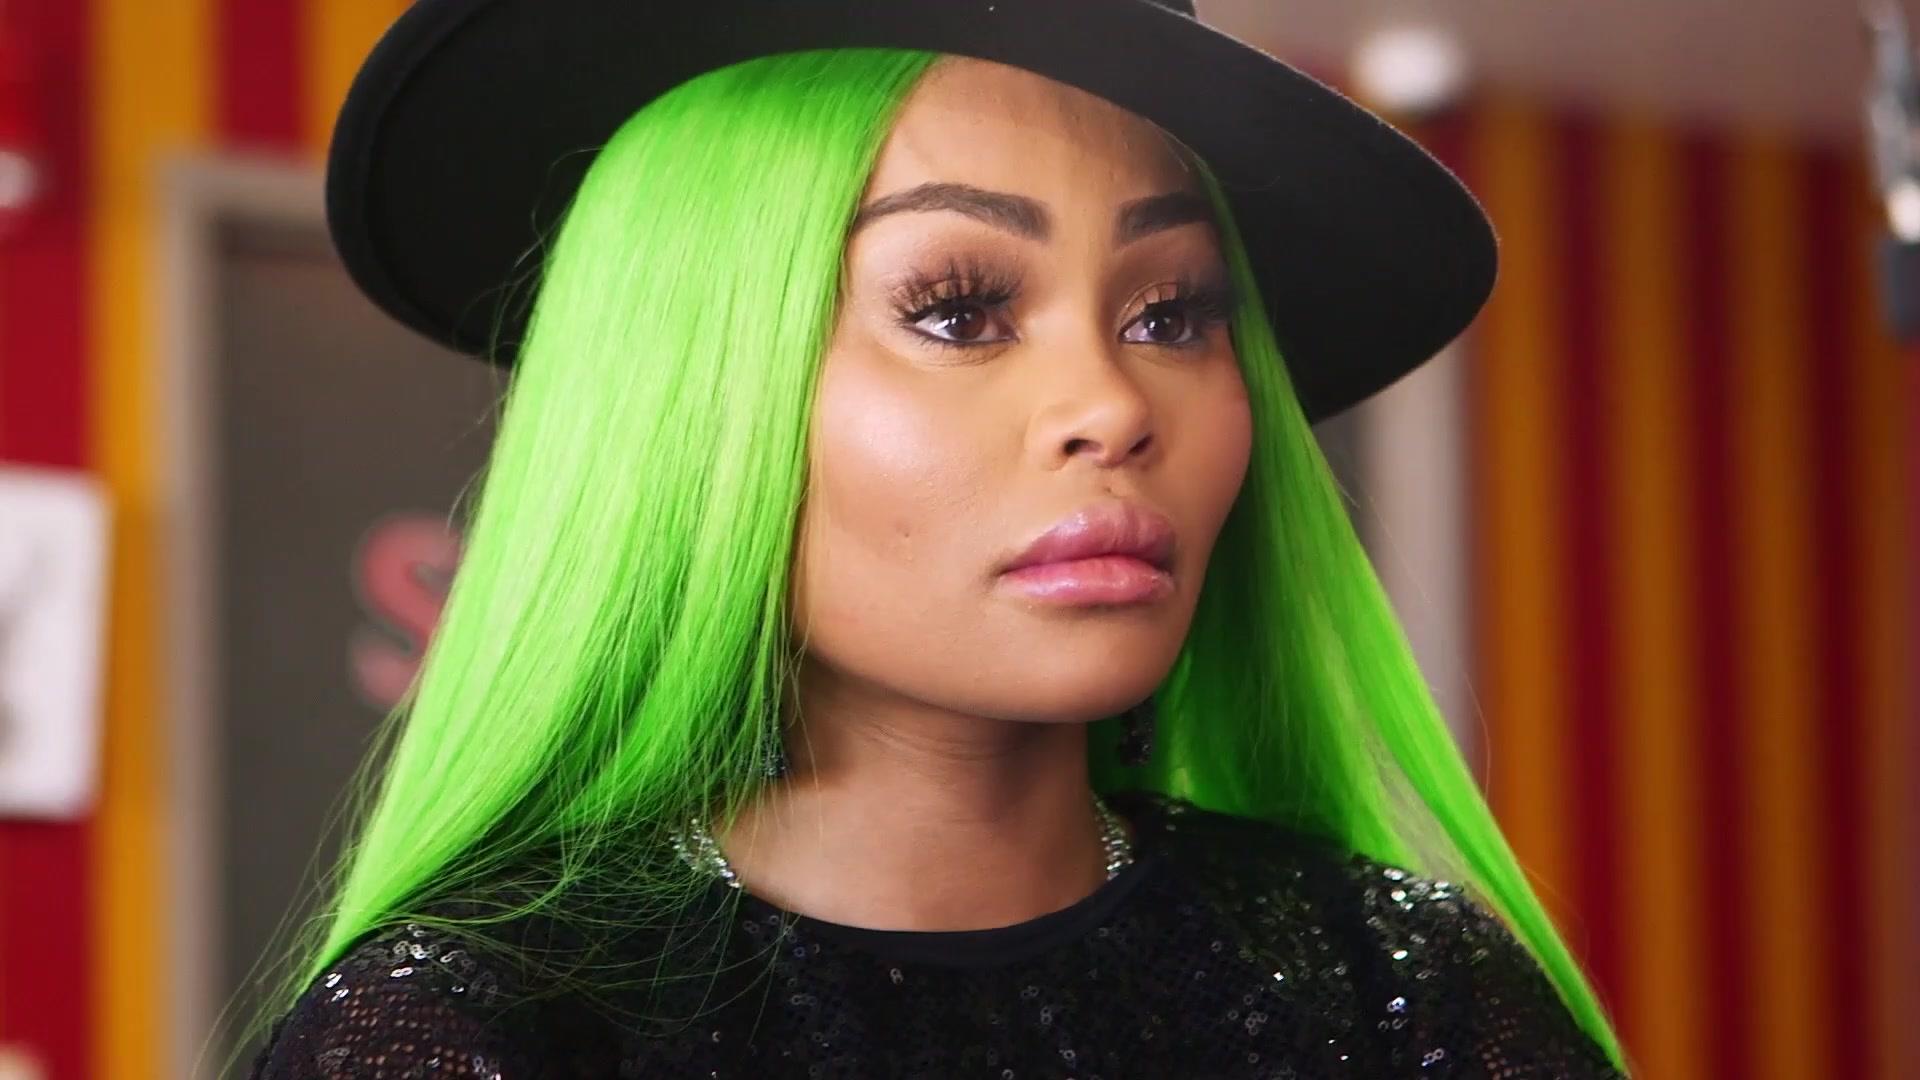 Watch 'Your Homies Ain't Your Homies!' | The Real Blac Chyna Video Extras